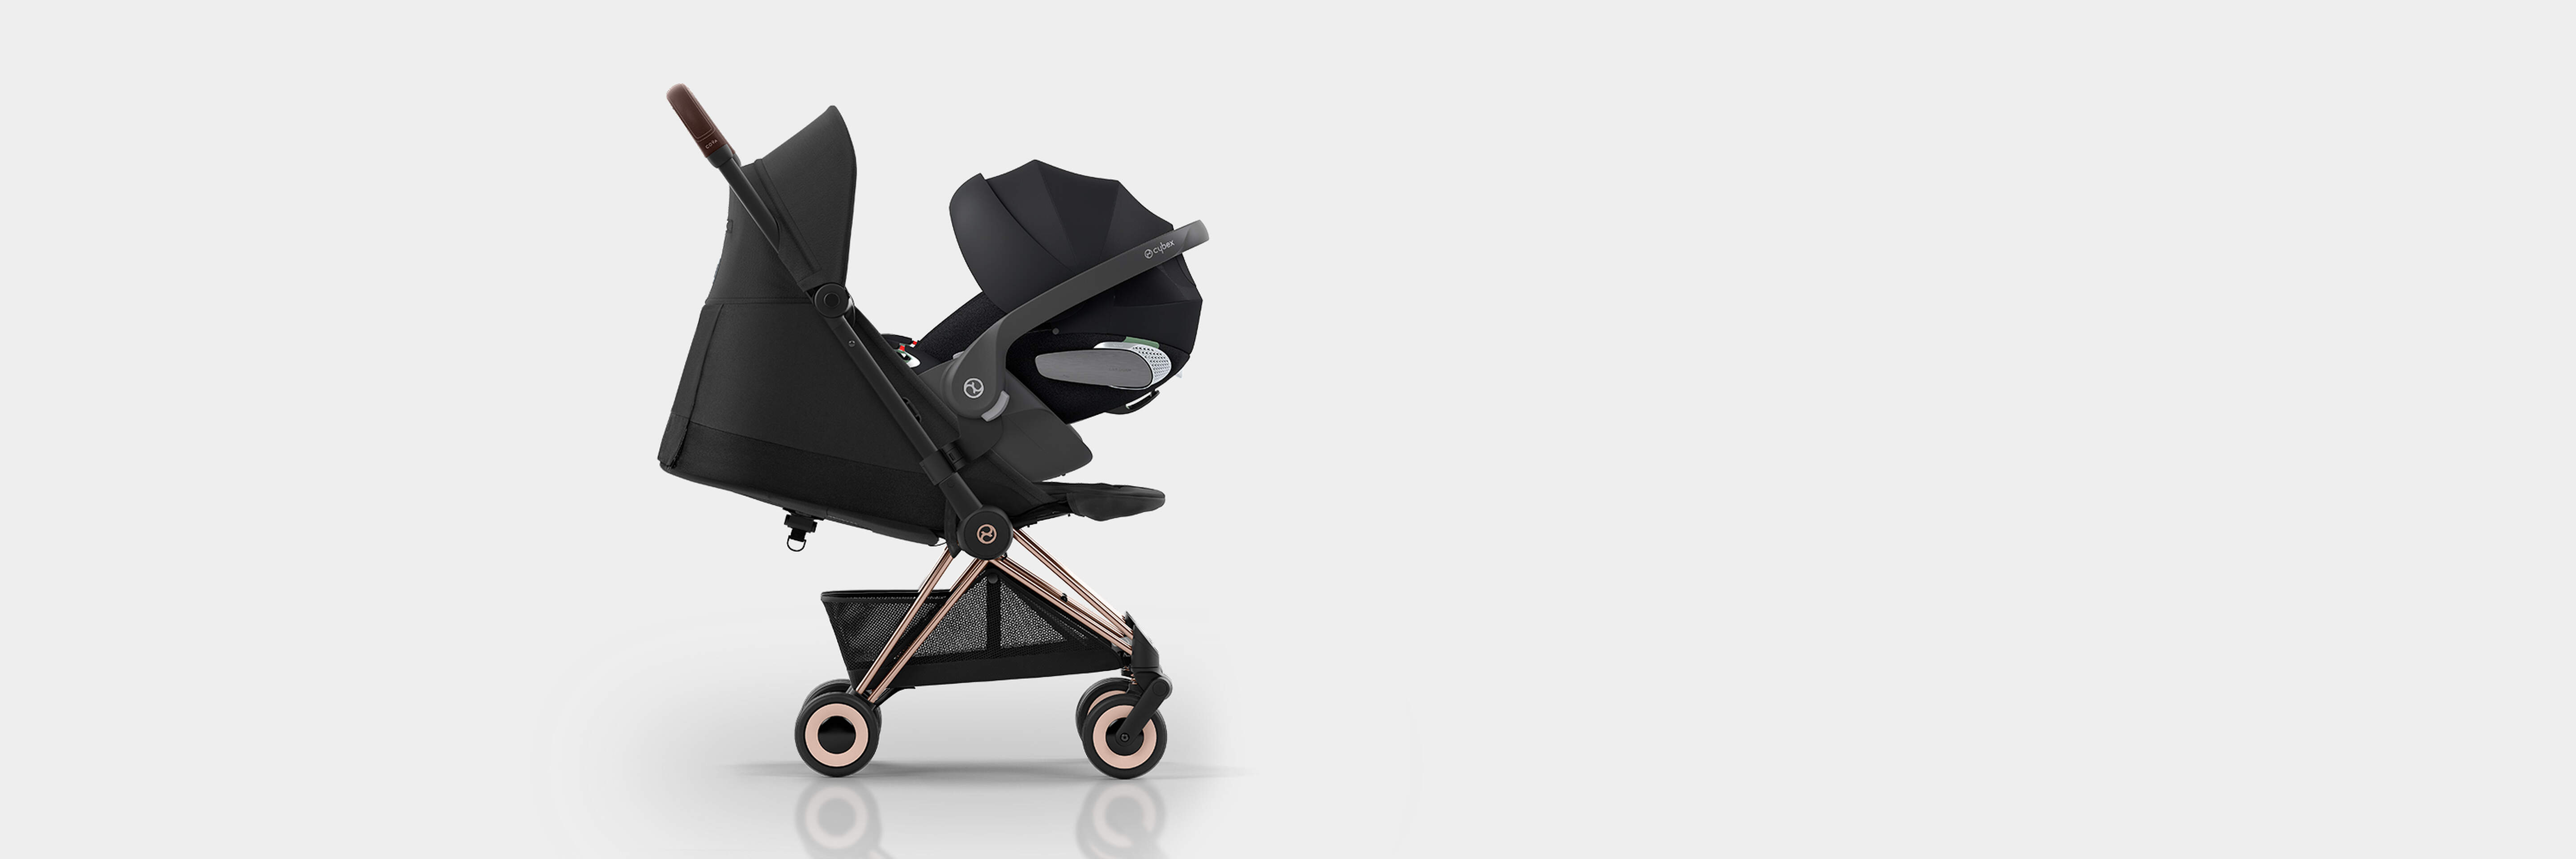 We are really excited to showcase the brand-new Cybex Coya compact str, cybex